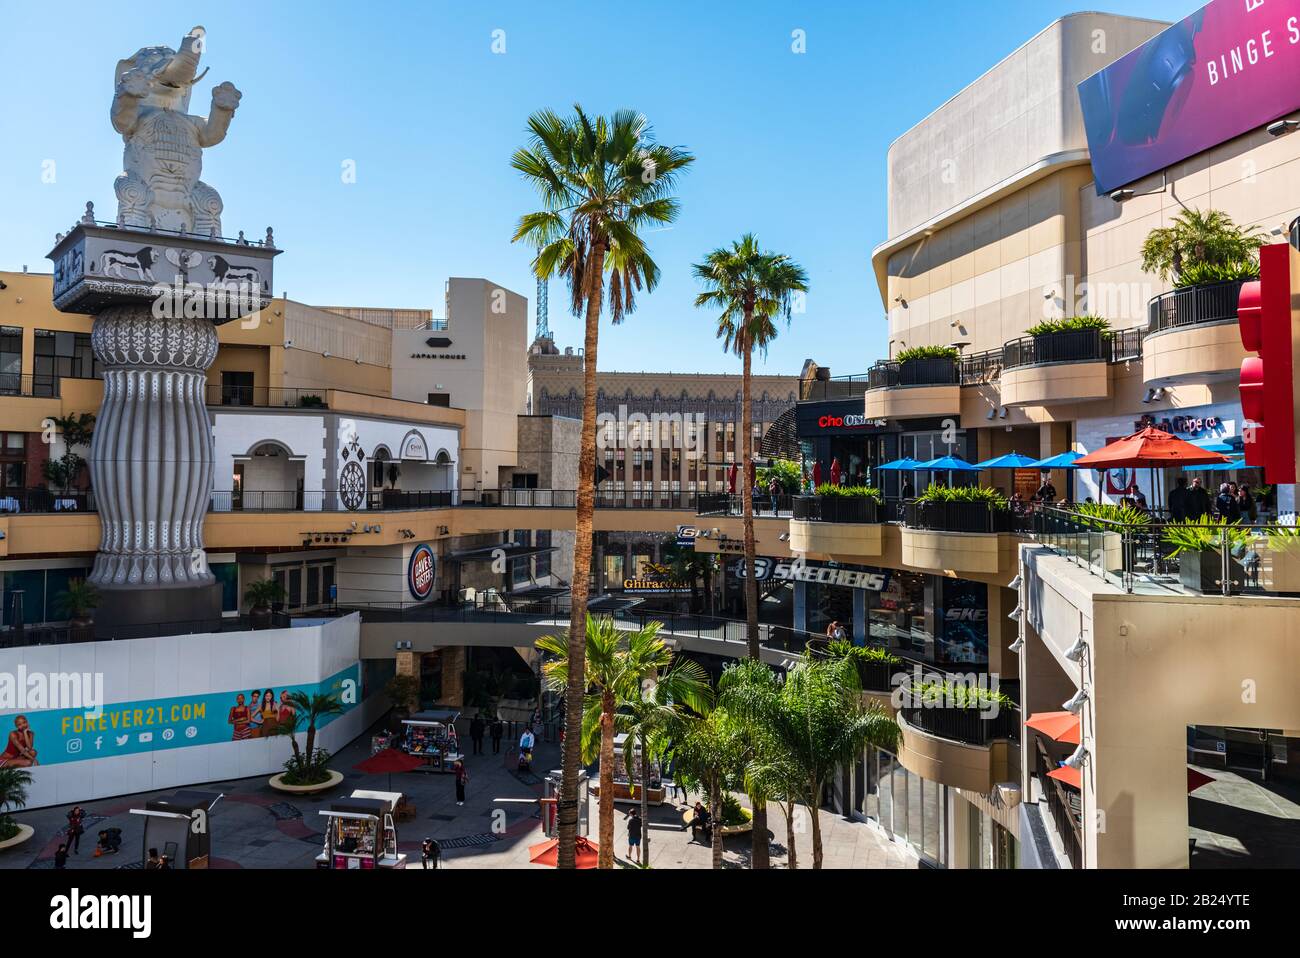 Los Angeles, California - February 8, 2019: View of the interior square of the Dolby Theatre in Los Angeles Stock Photo